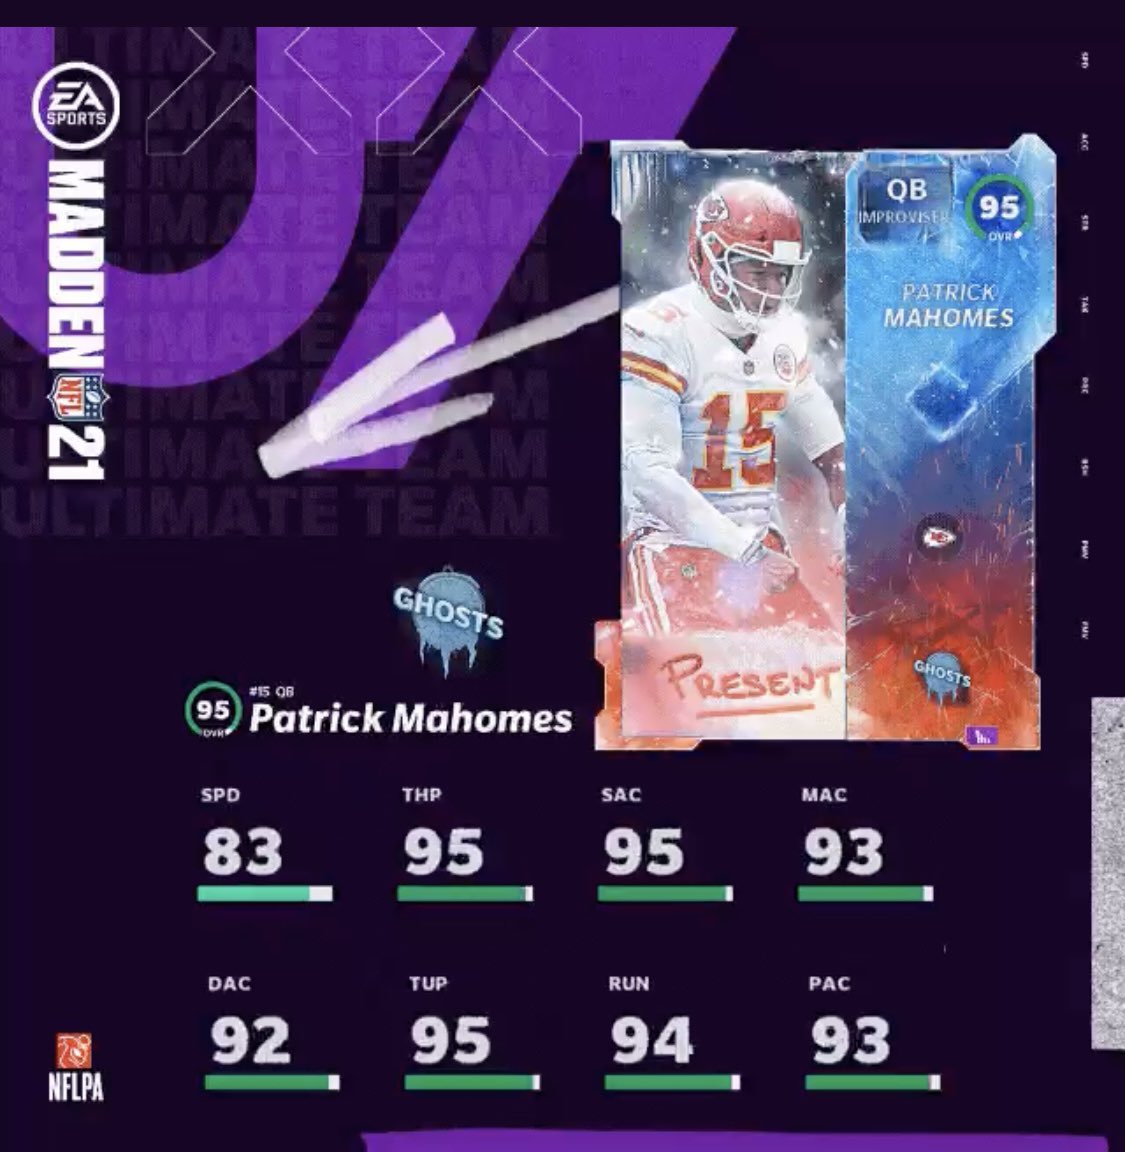 How to claim Madden NFL 23 Zero Chill Ultimate Team Pack for free?